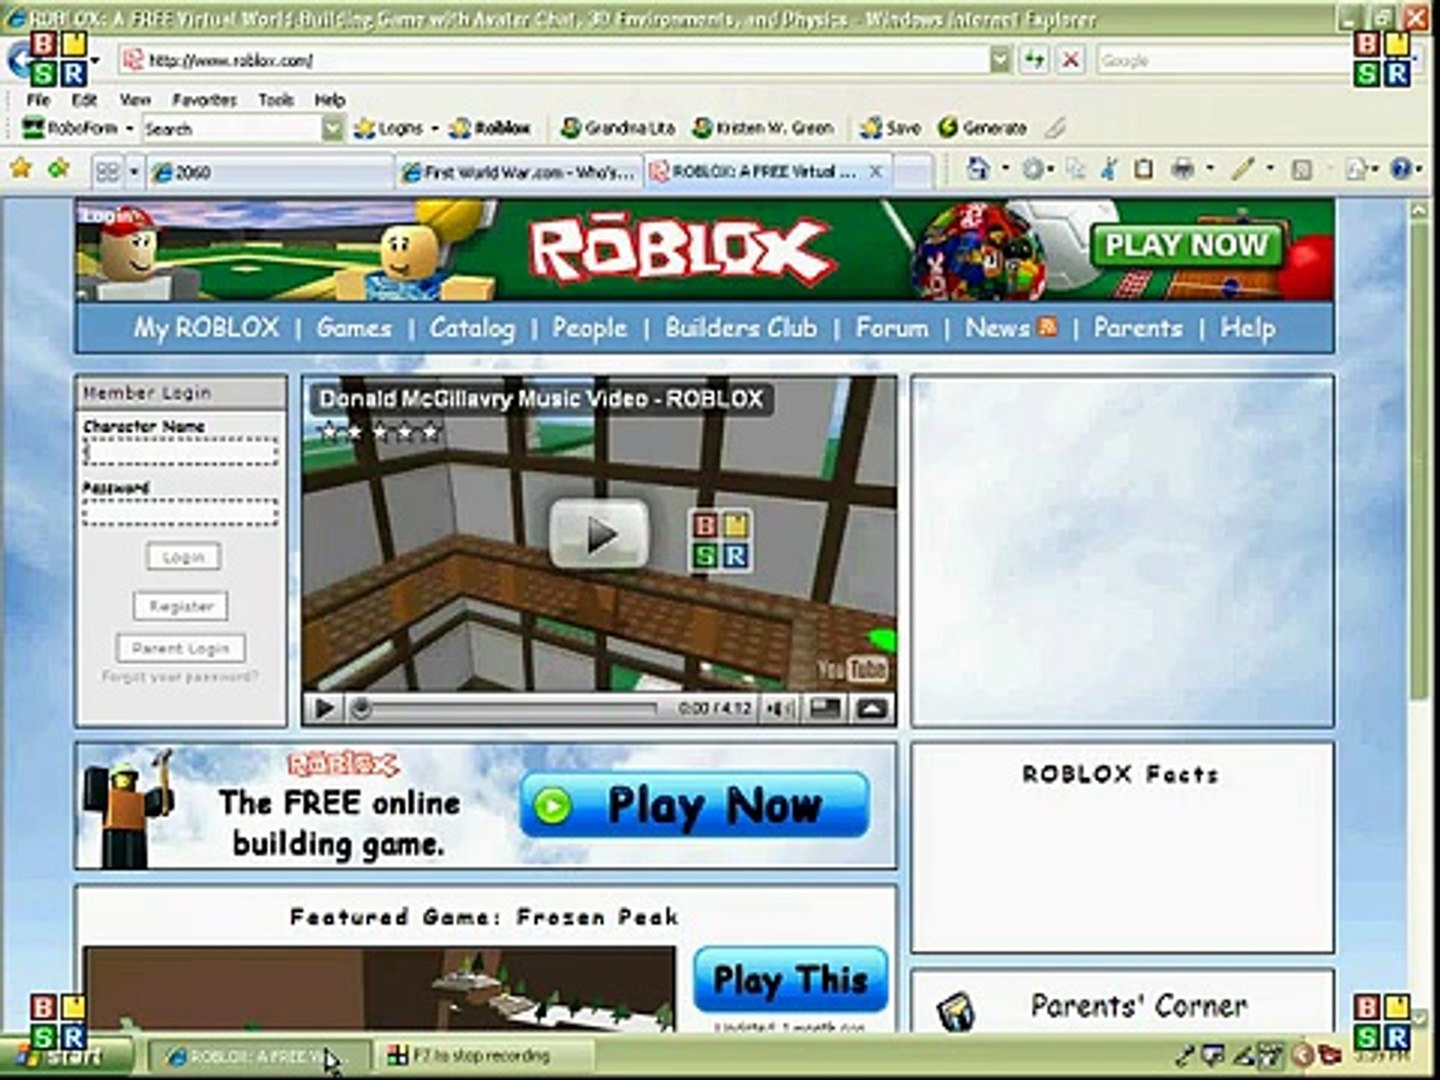 Trade Currency On Roblox Video Dailymotion - roblox login page member login